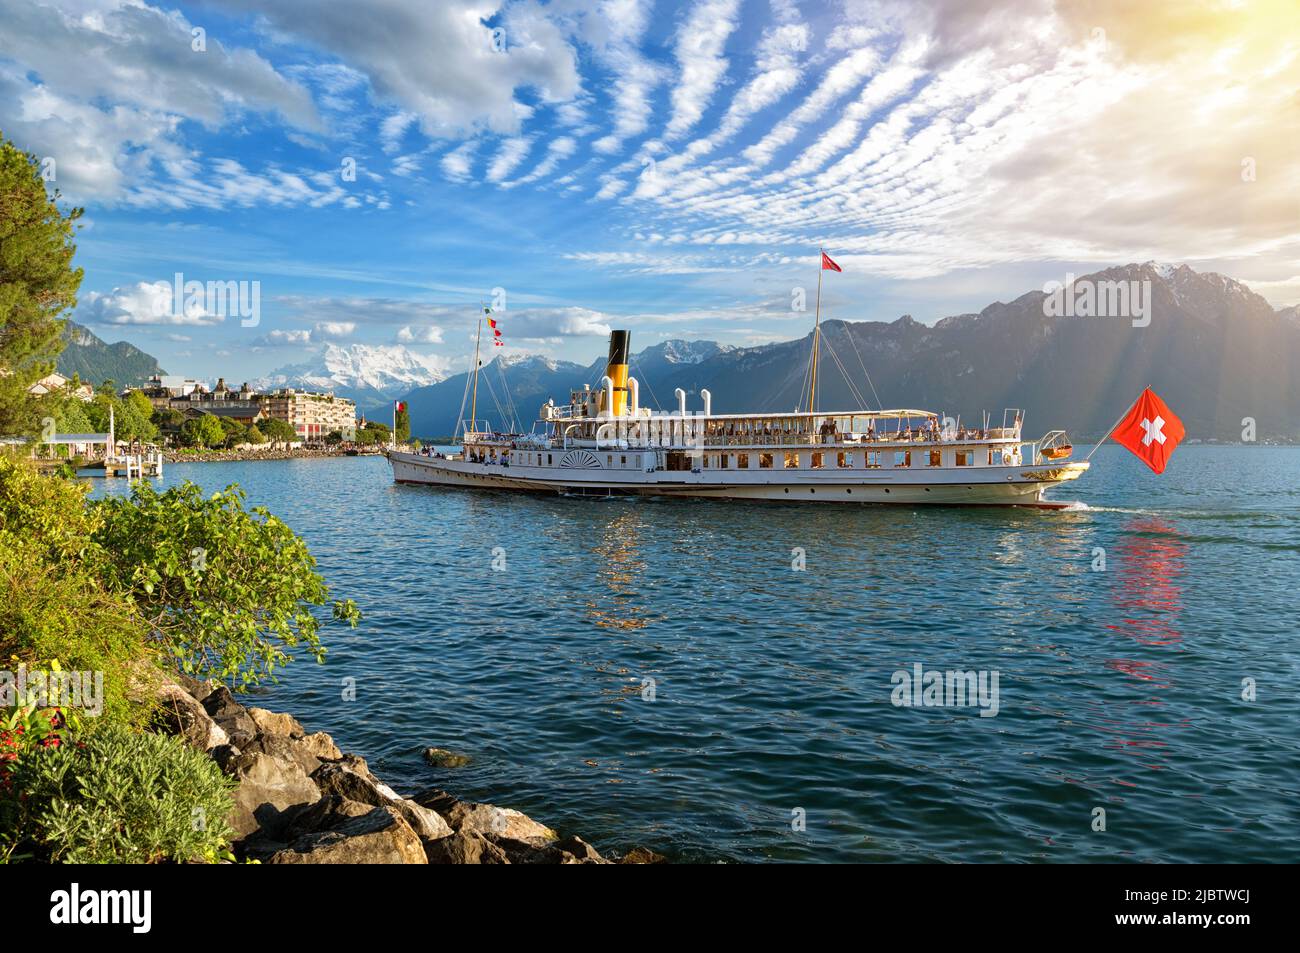 Beautiful summer evening landscape of Lake Geneva with picturesque shores and pleasure ship against Alpine mountains in Montreux, Switzerland Stock Photo